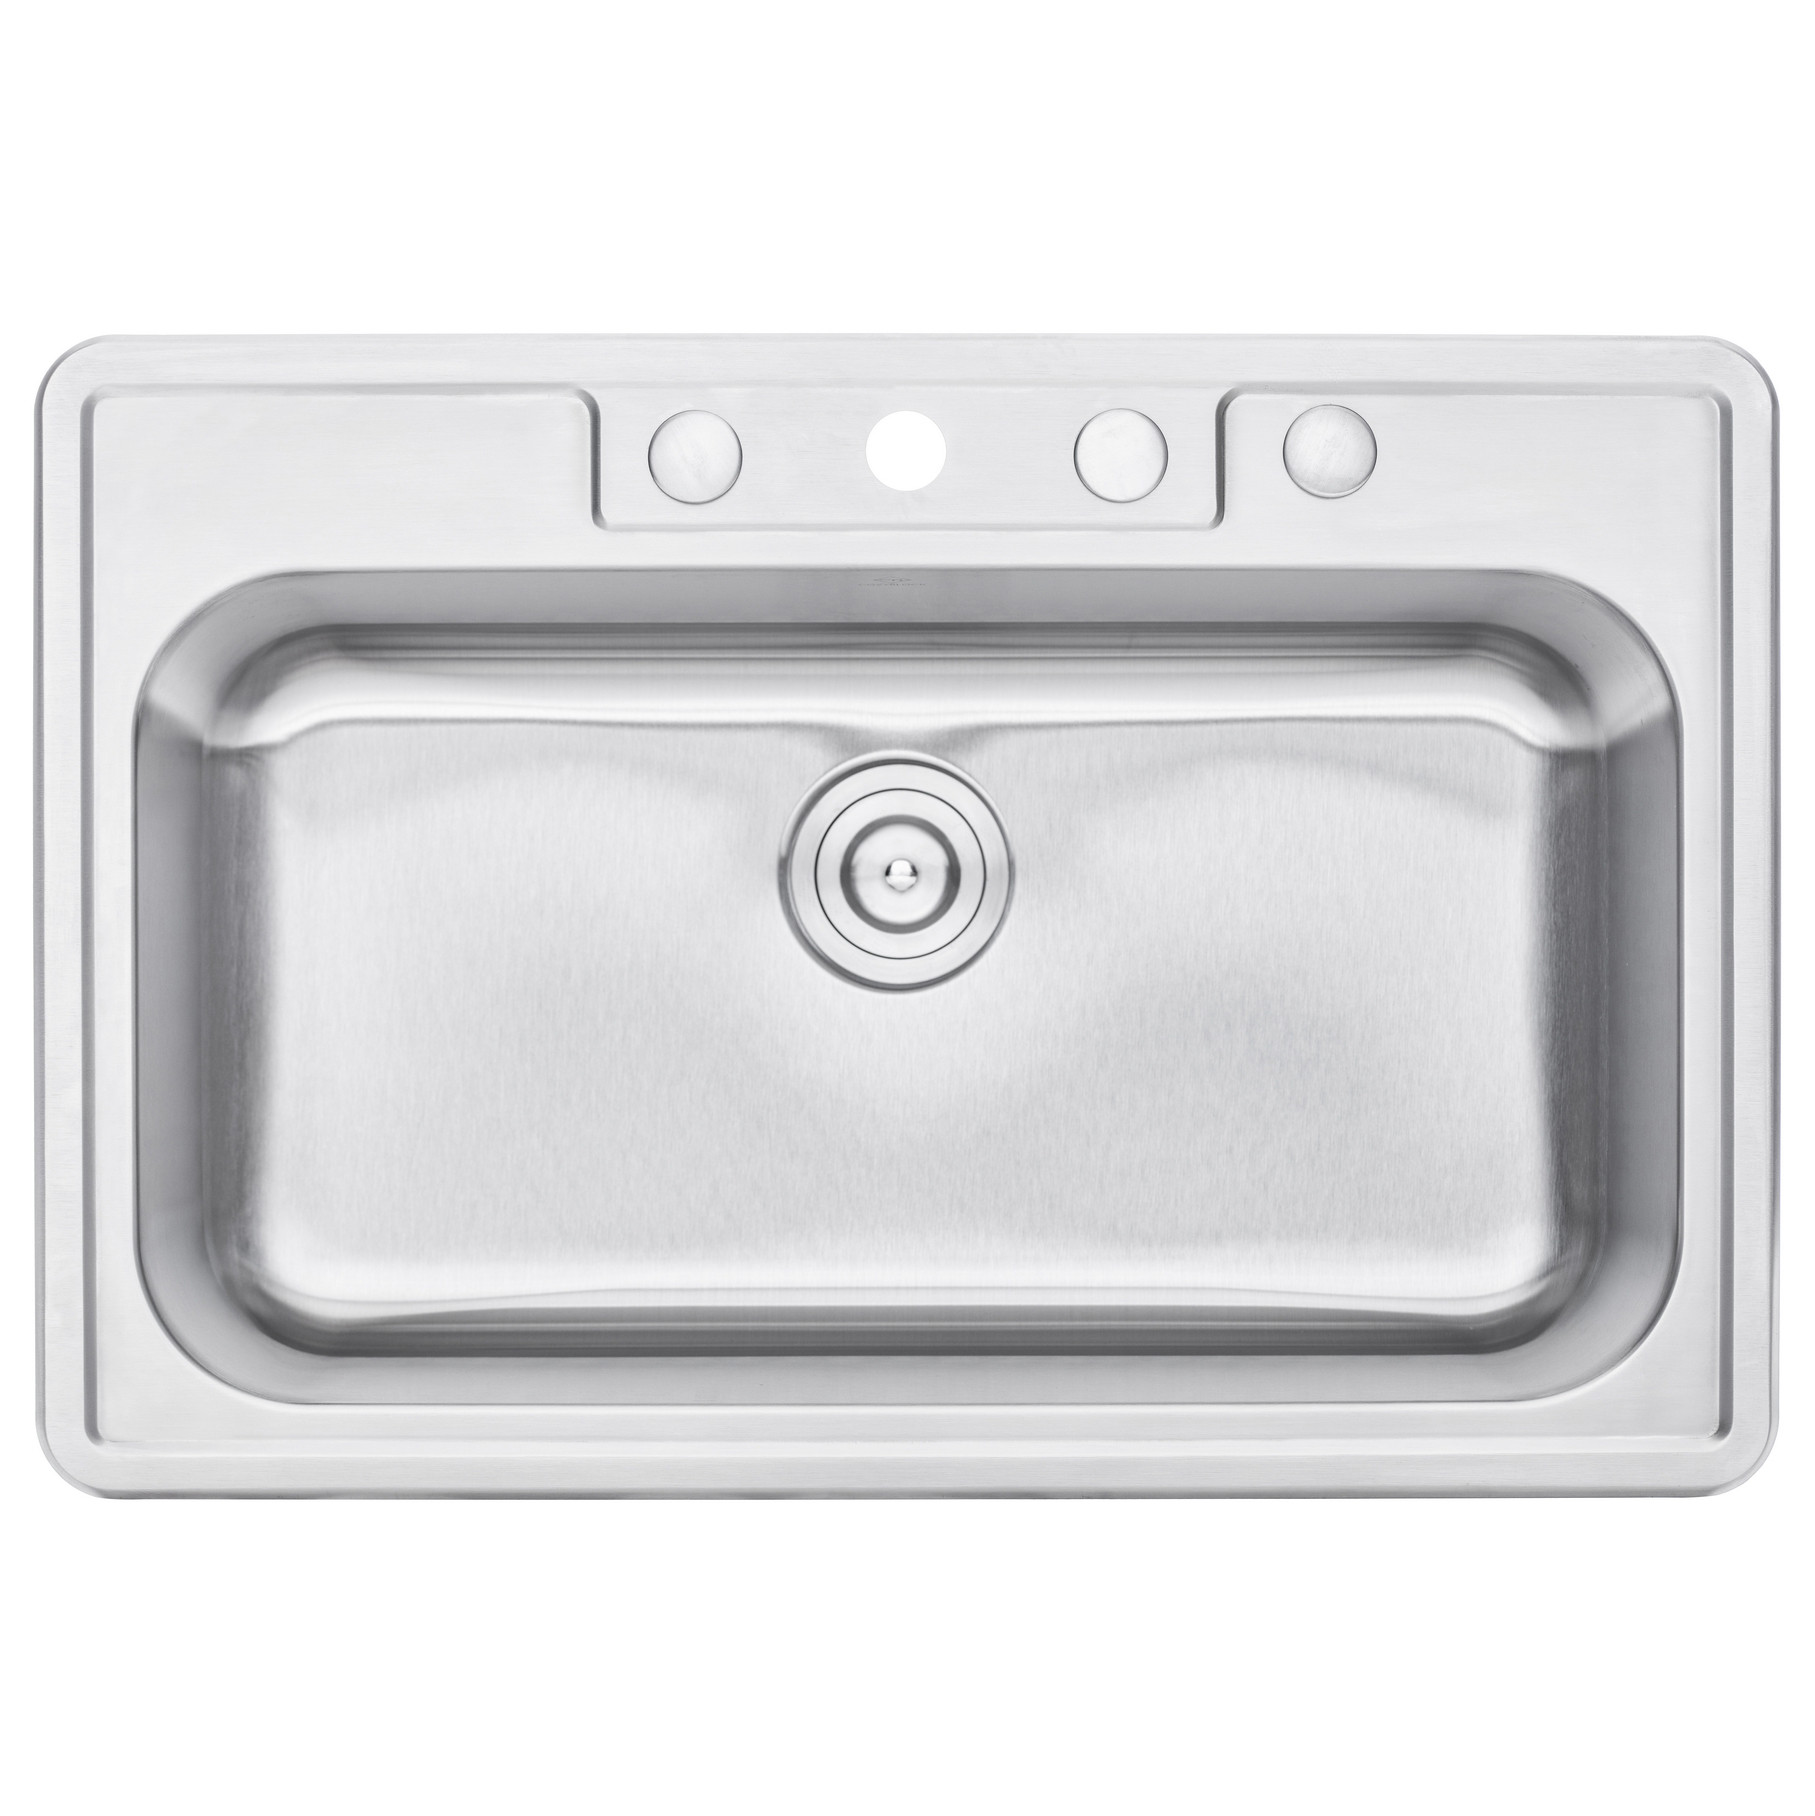 Details about   33"x22" Stainless Steel Kitchen Sink Drop-in Top Mount Single Bowl 18 Gauge 